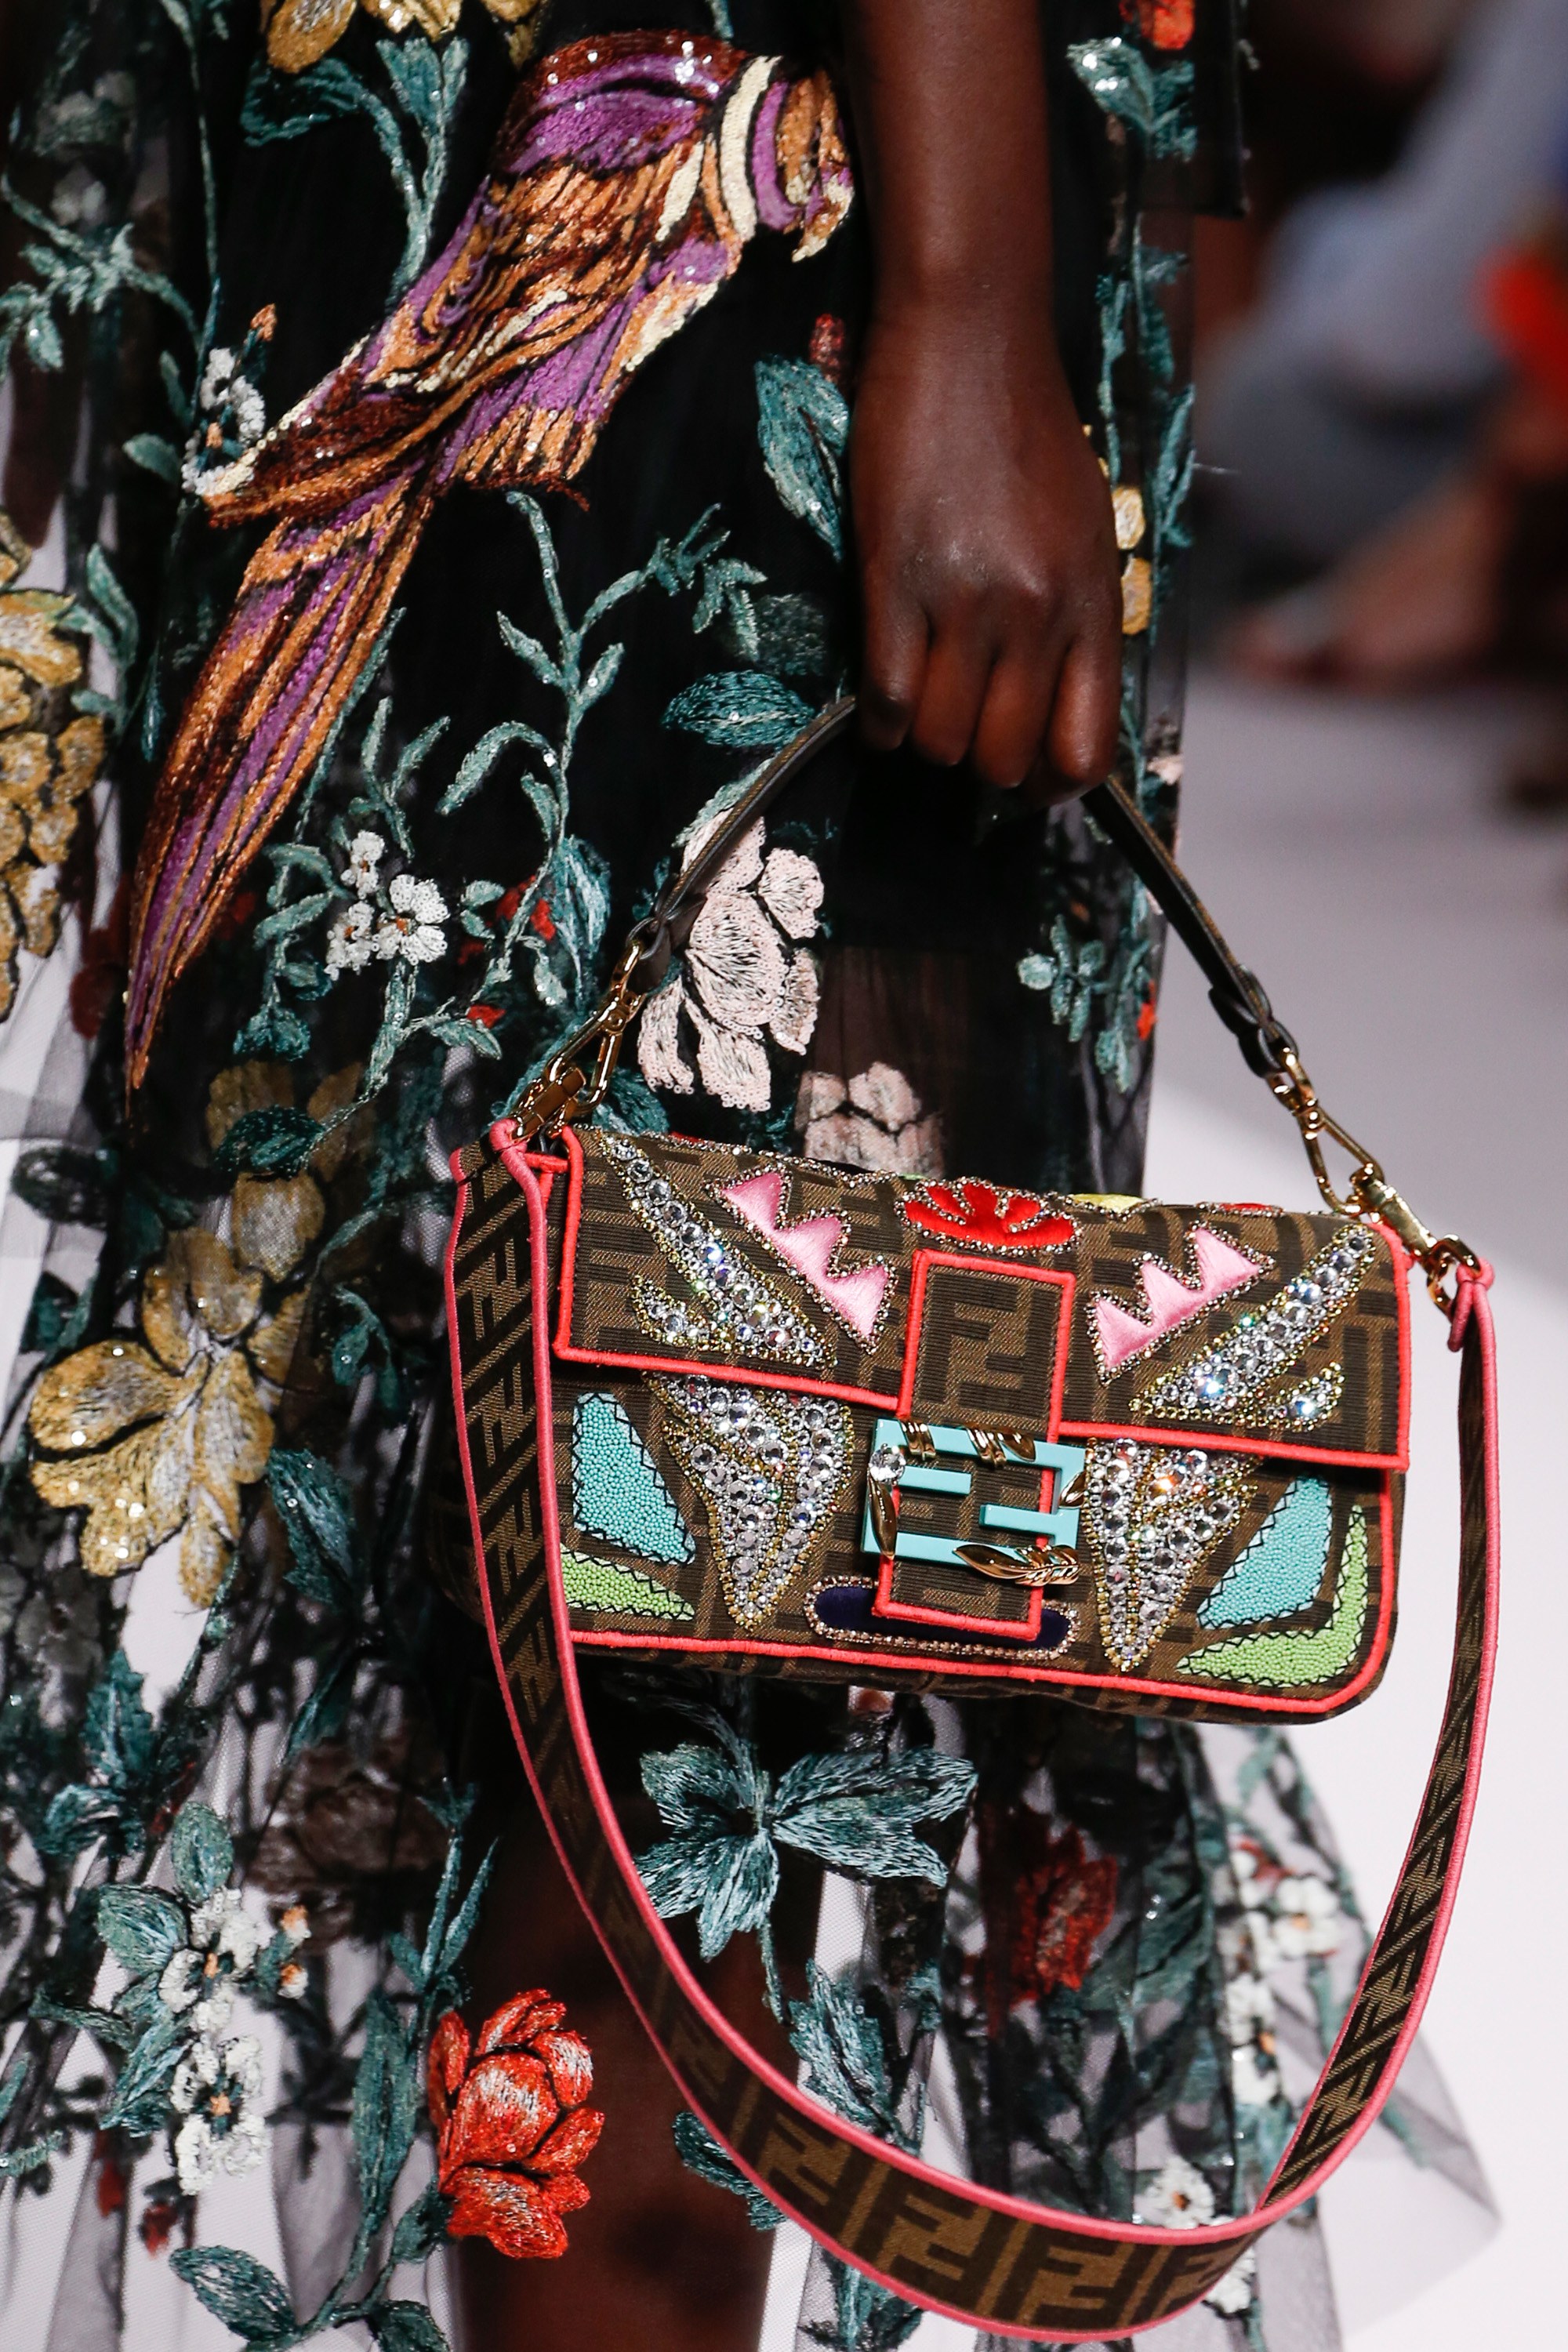 Fendi Spring/Summer 2019 Runway Bag Collection - Spotted Fashion